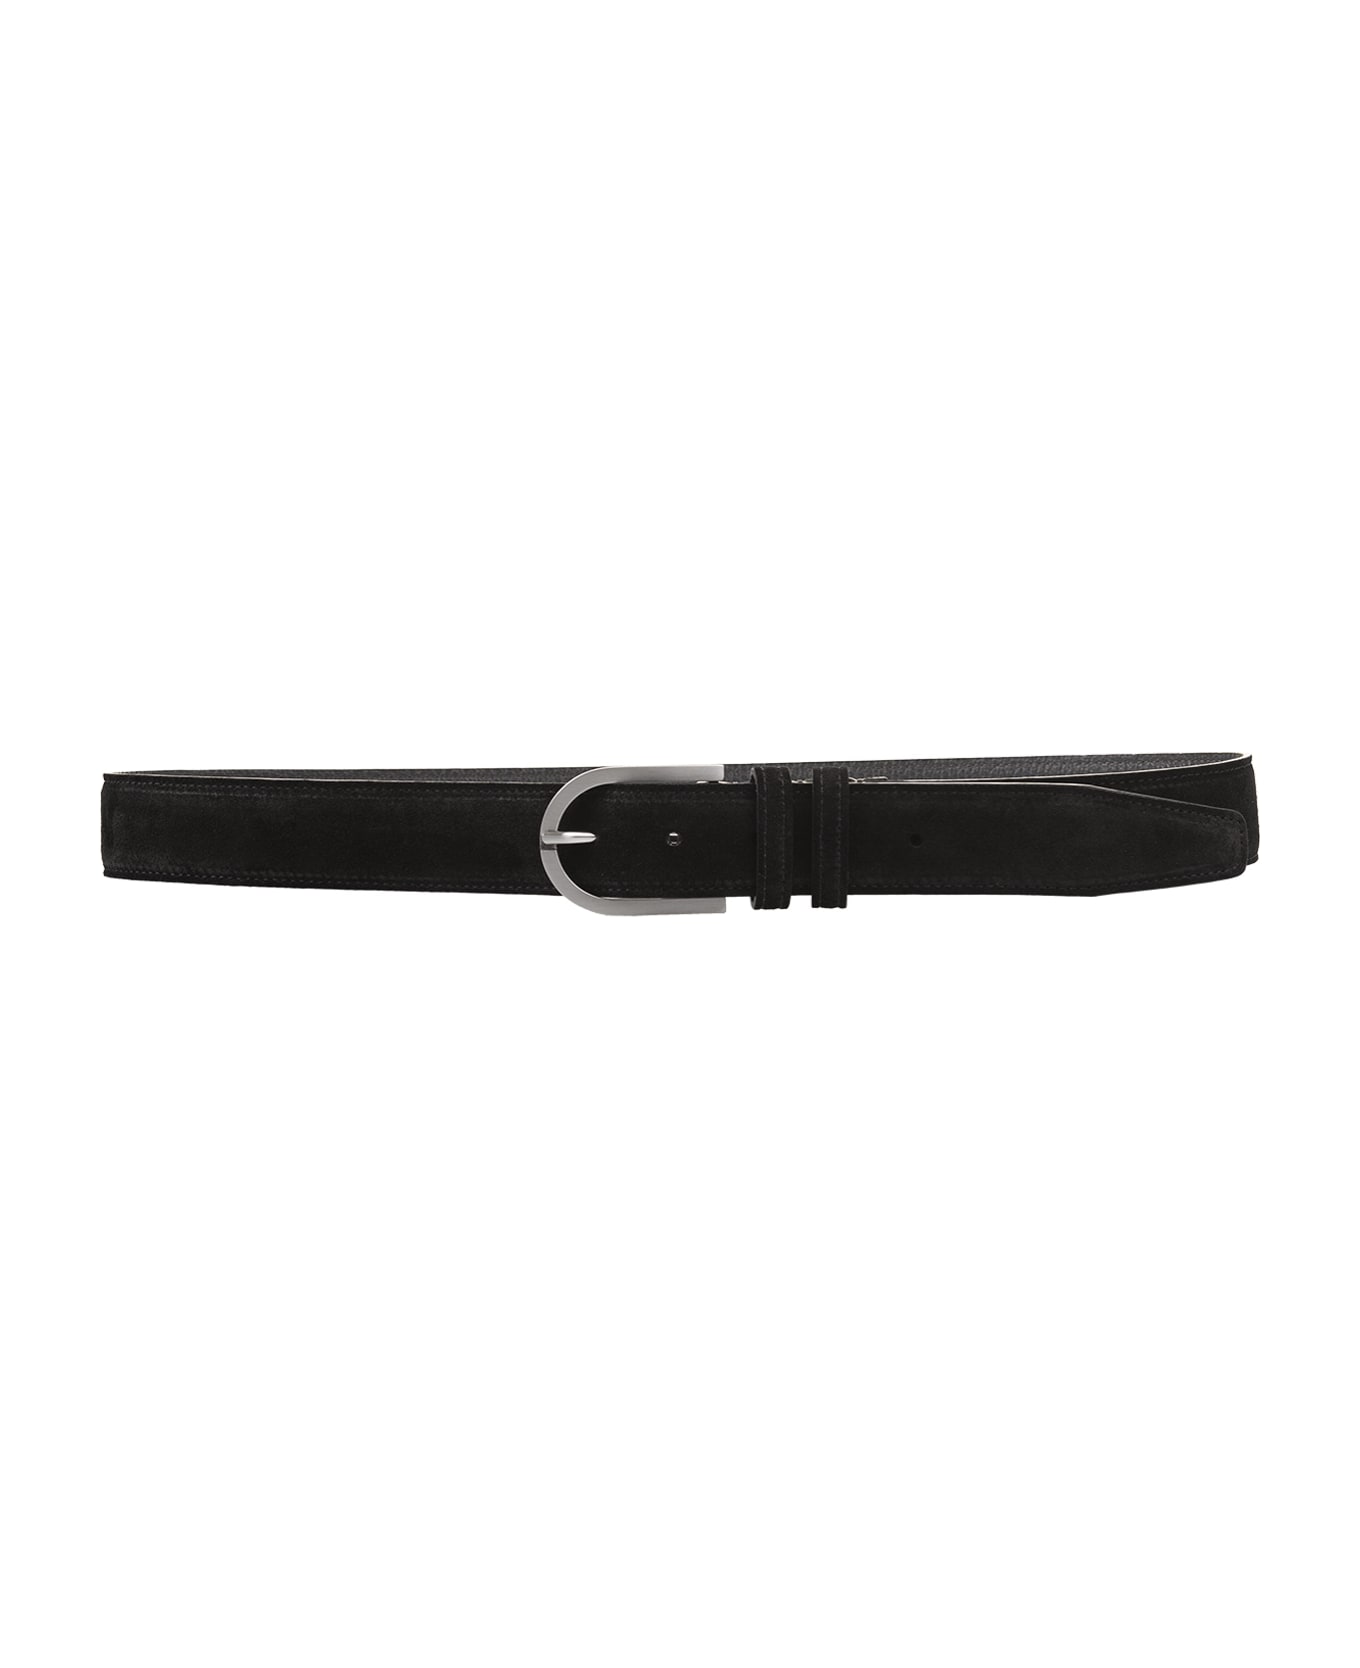 Kiton Black Suede Belt With Silver Buckle - Black